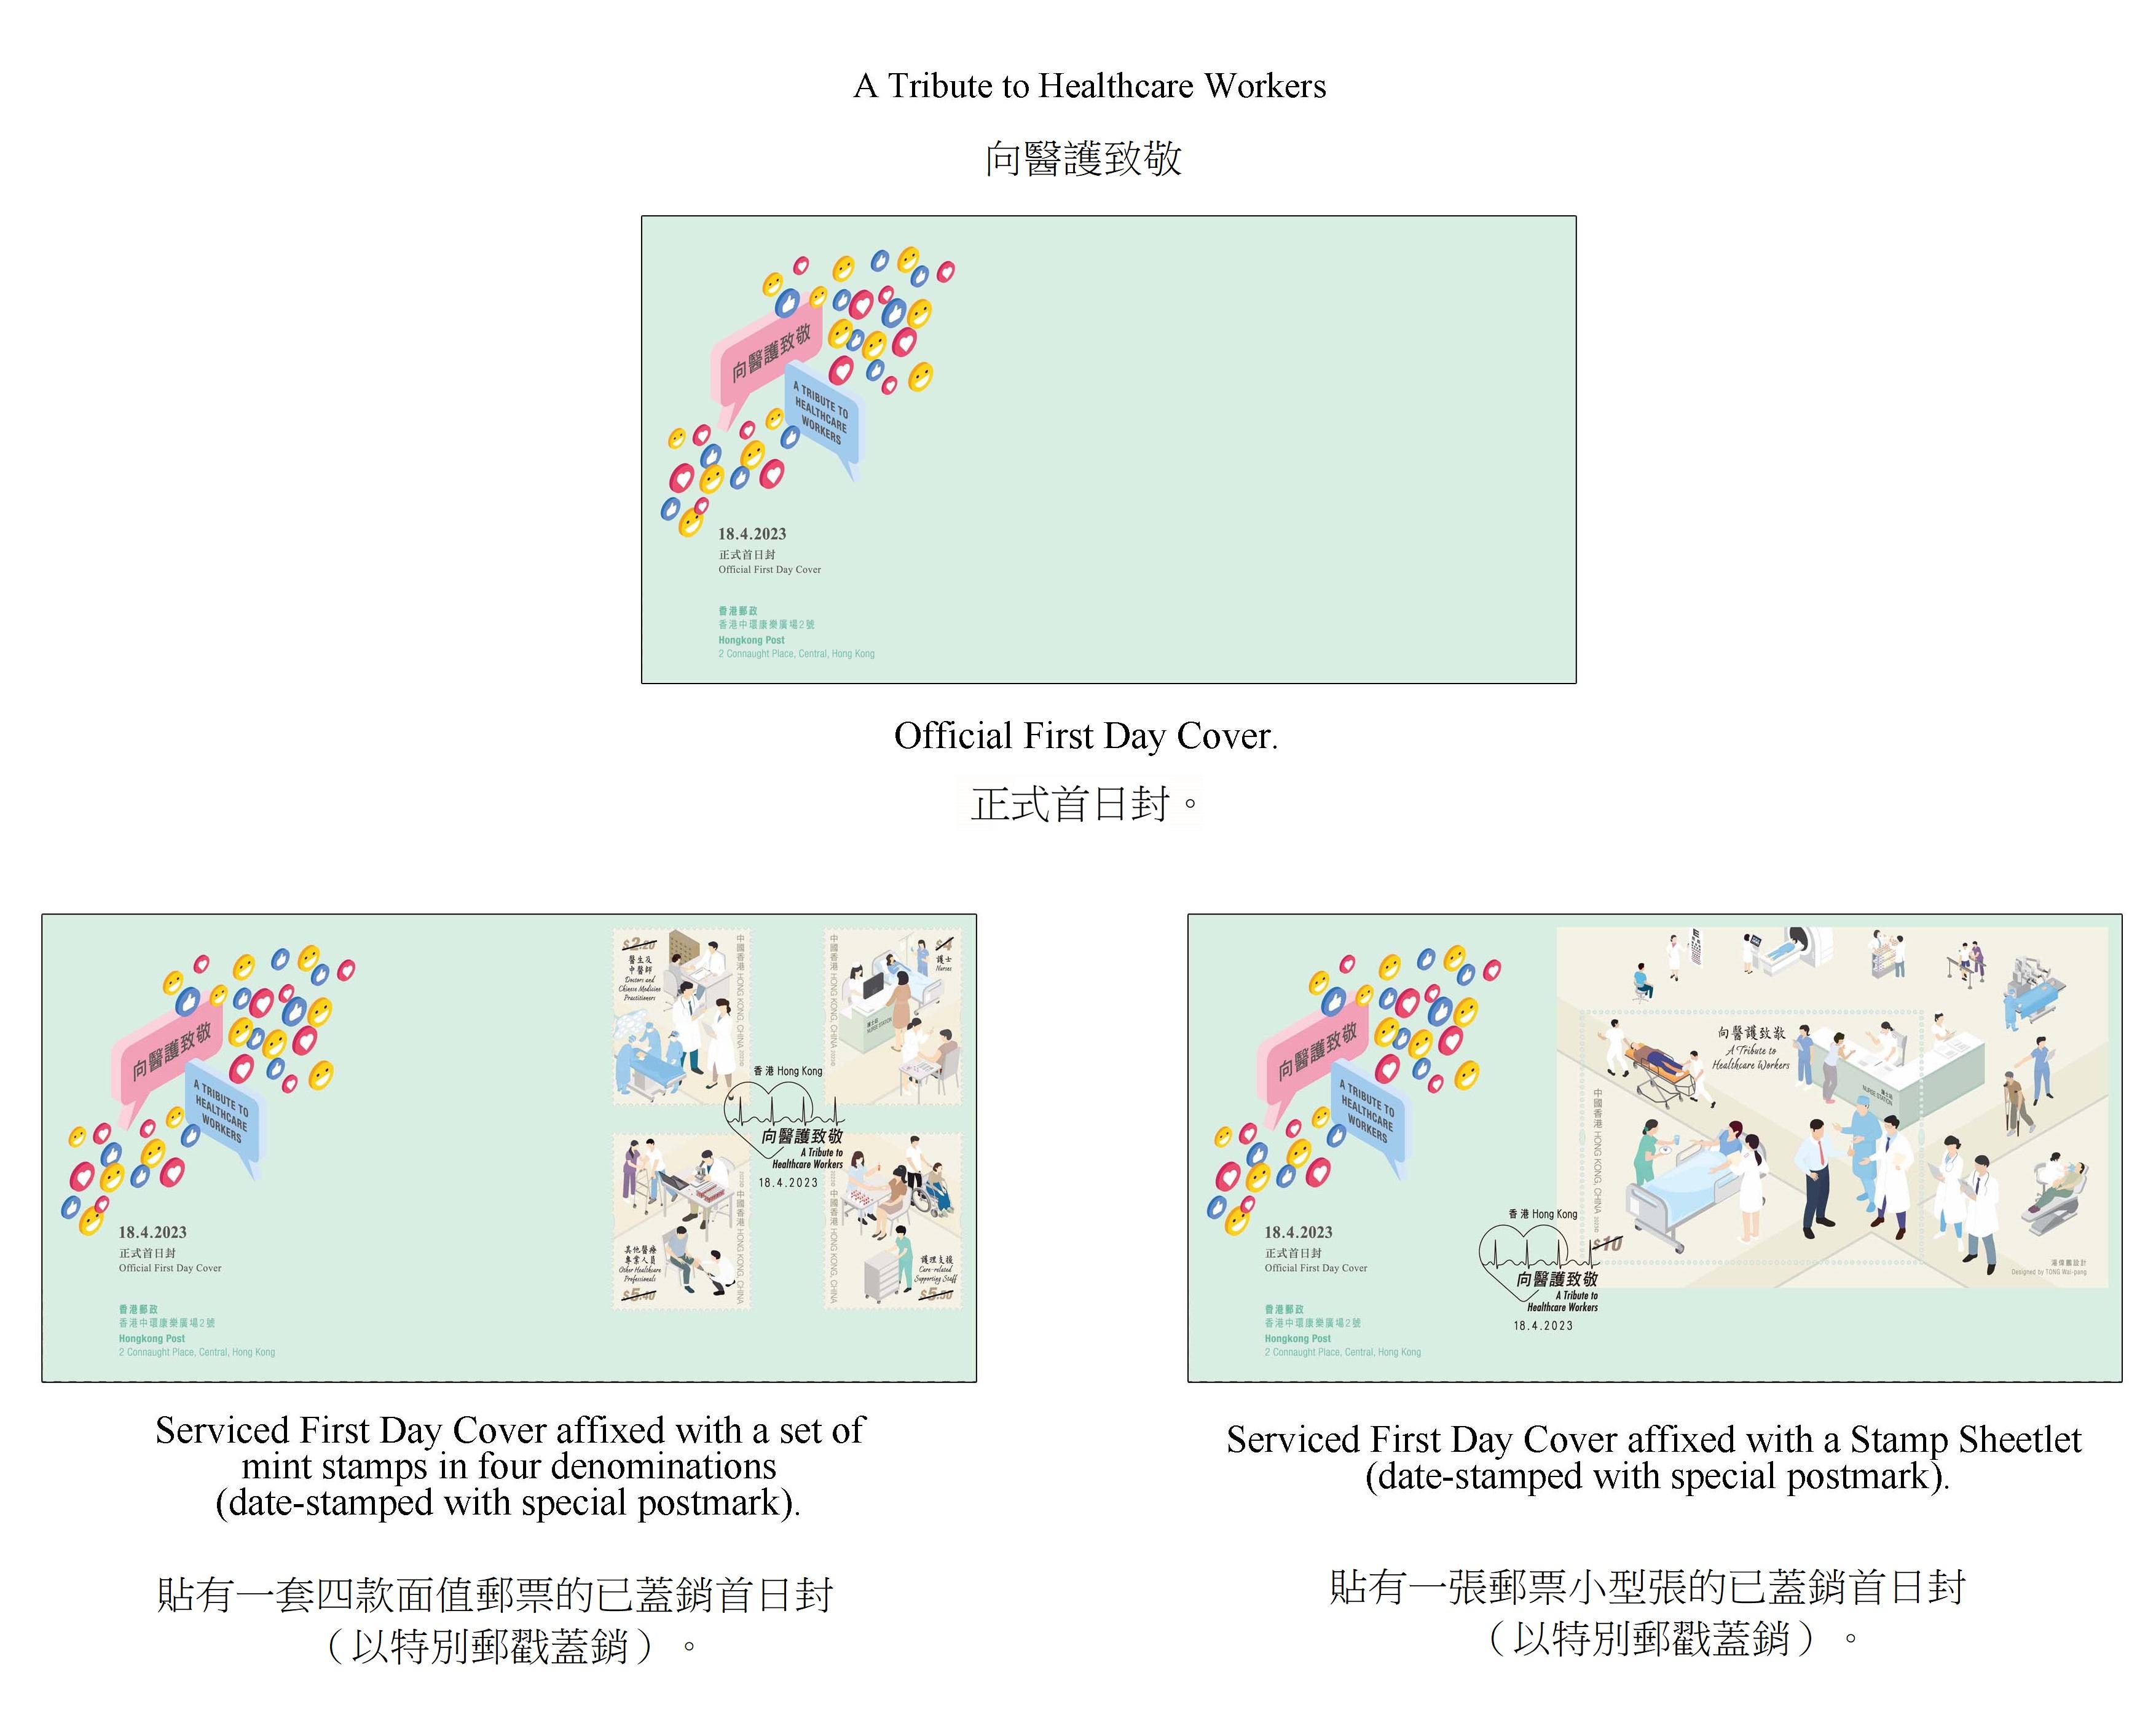 Hongkong Post will launch a special stamp issue and associated philatelic products on the theme of "A Tribute to Healthcare Workers" on April 18 (Tuesday). Photo shows the first day covers.
